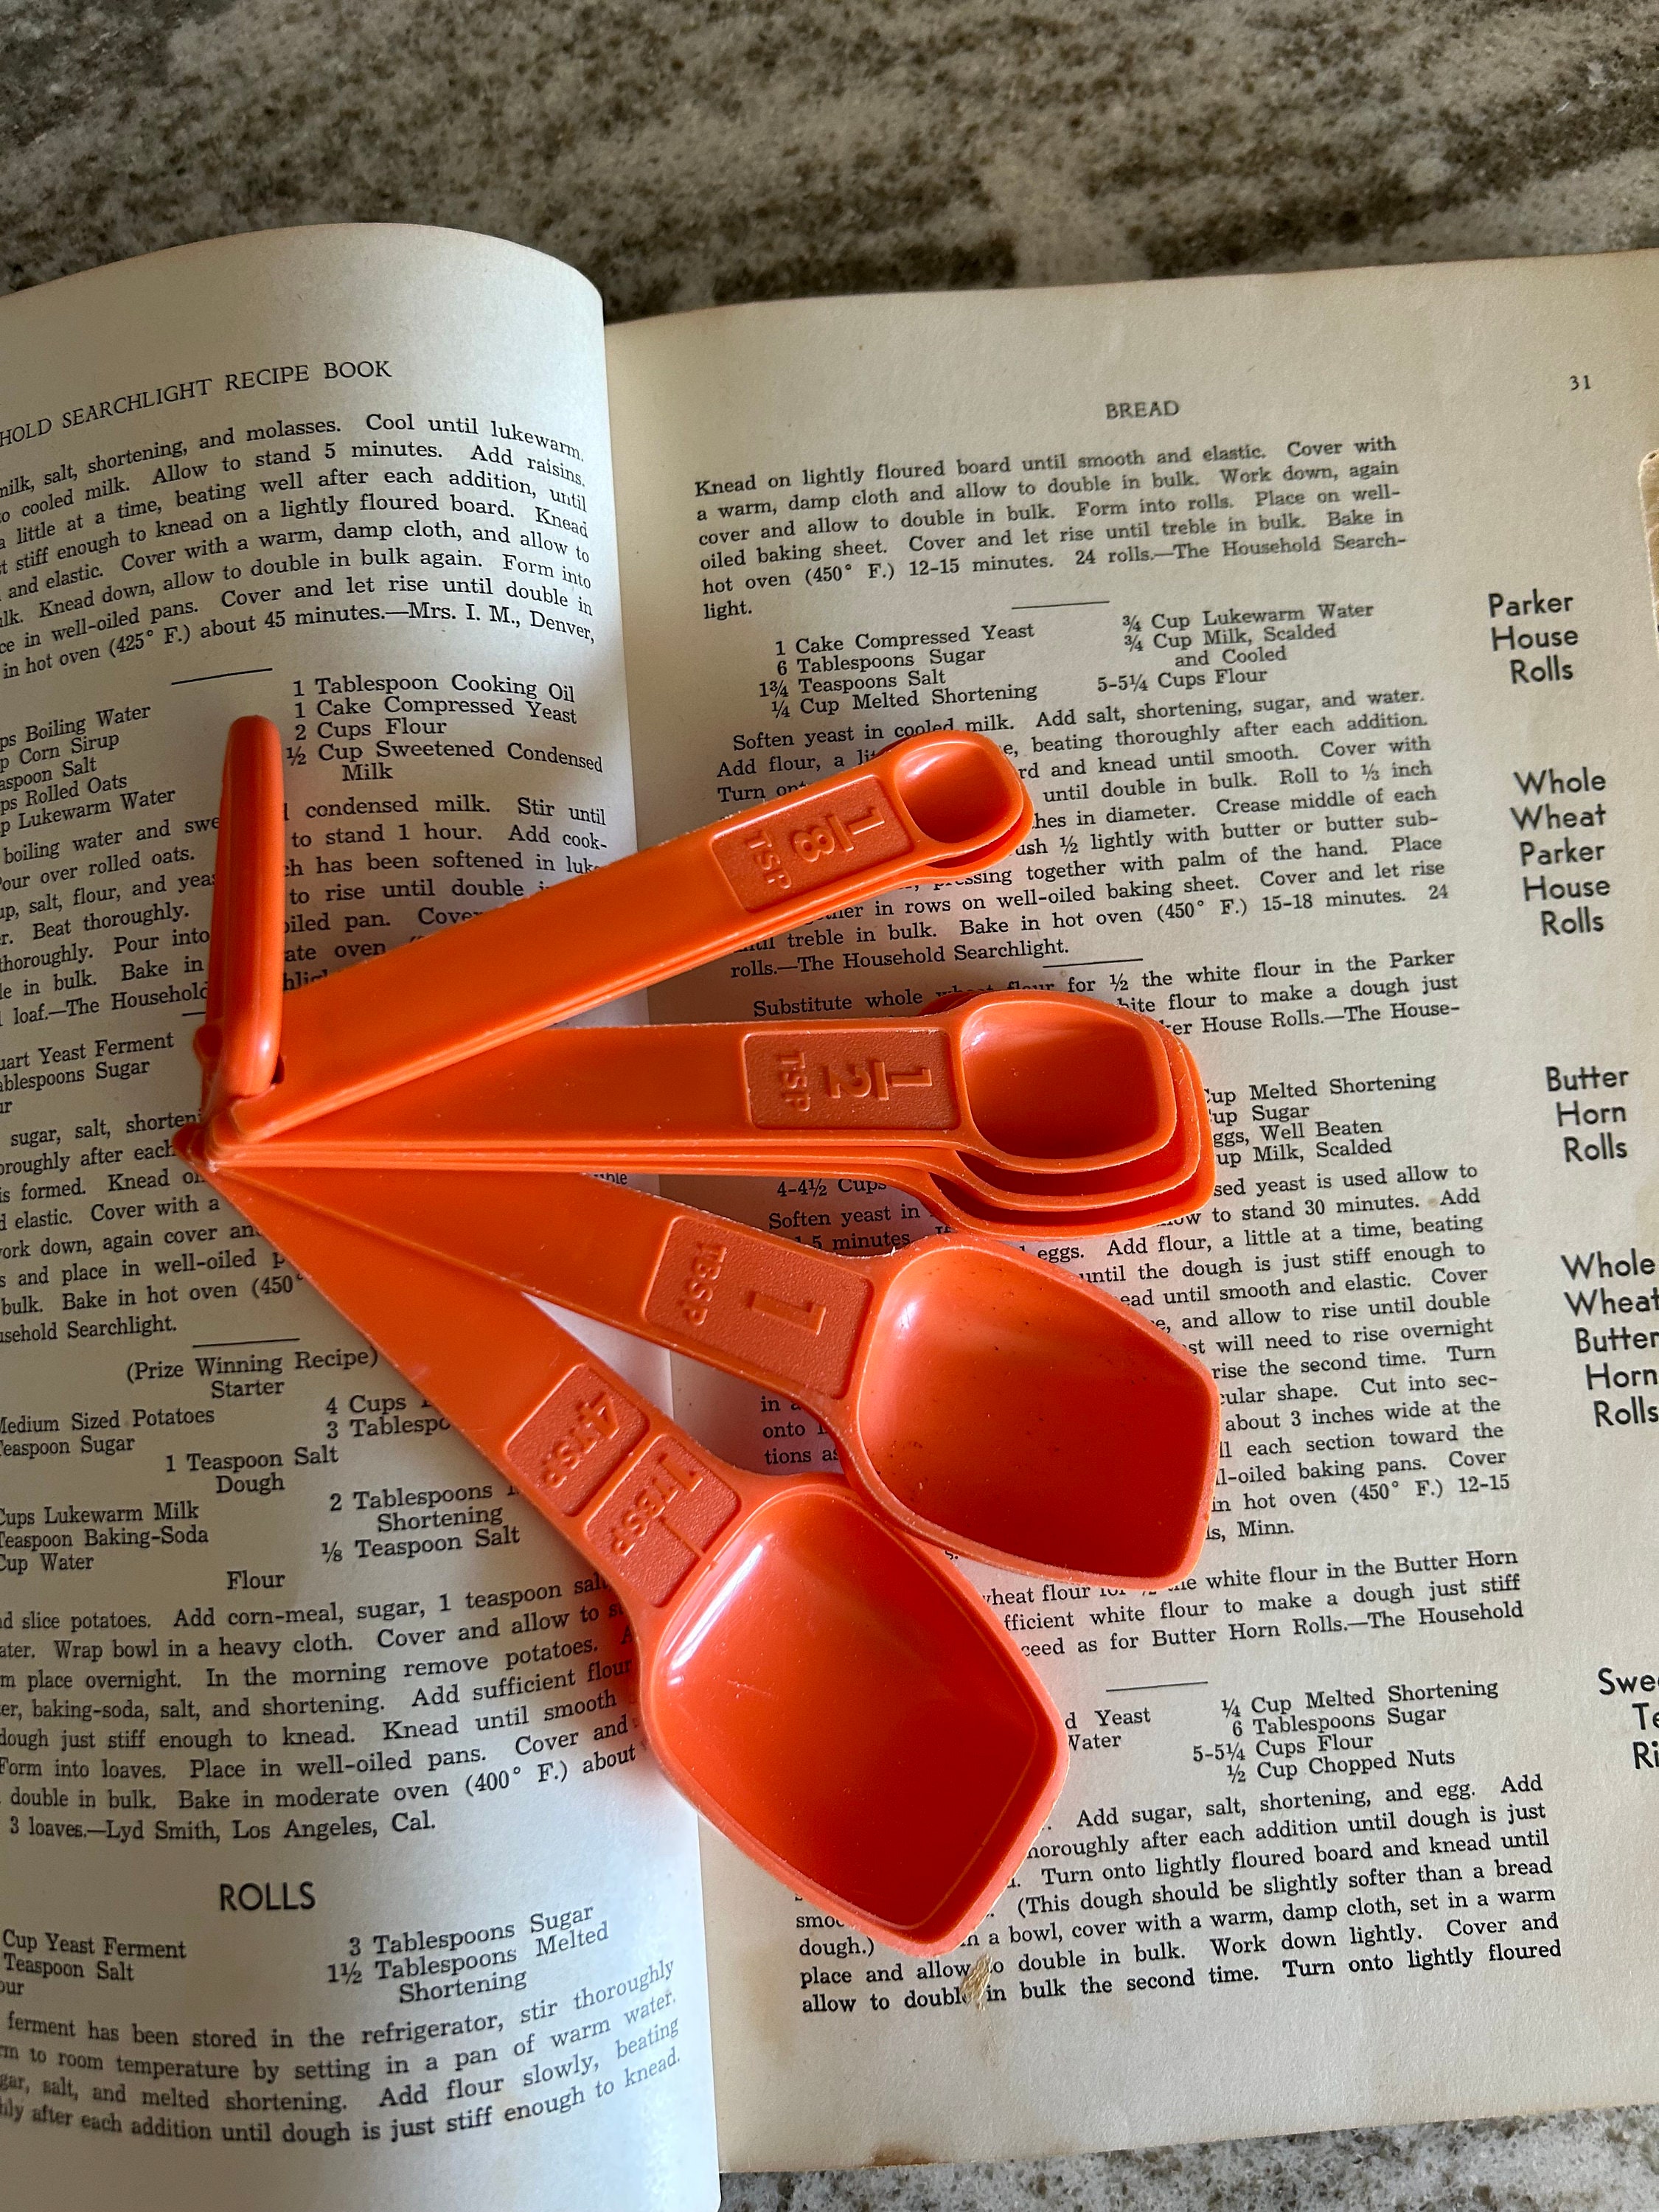 Tupperware Orange Measuring Spoons 7 With Attached Hoop 